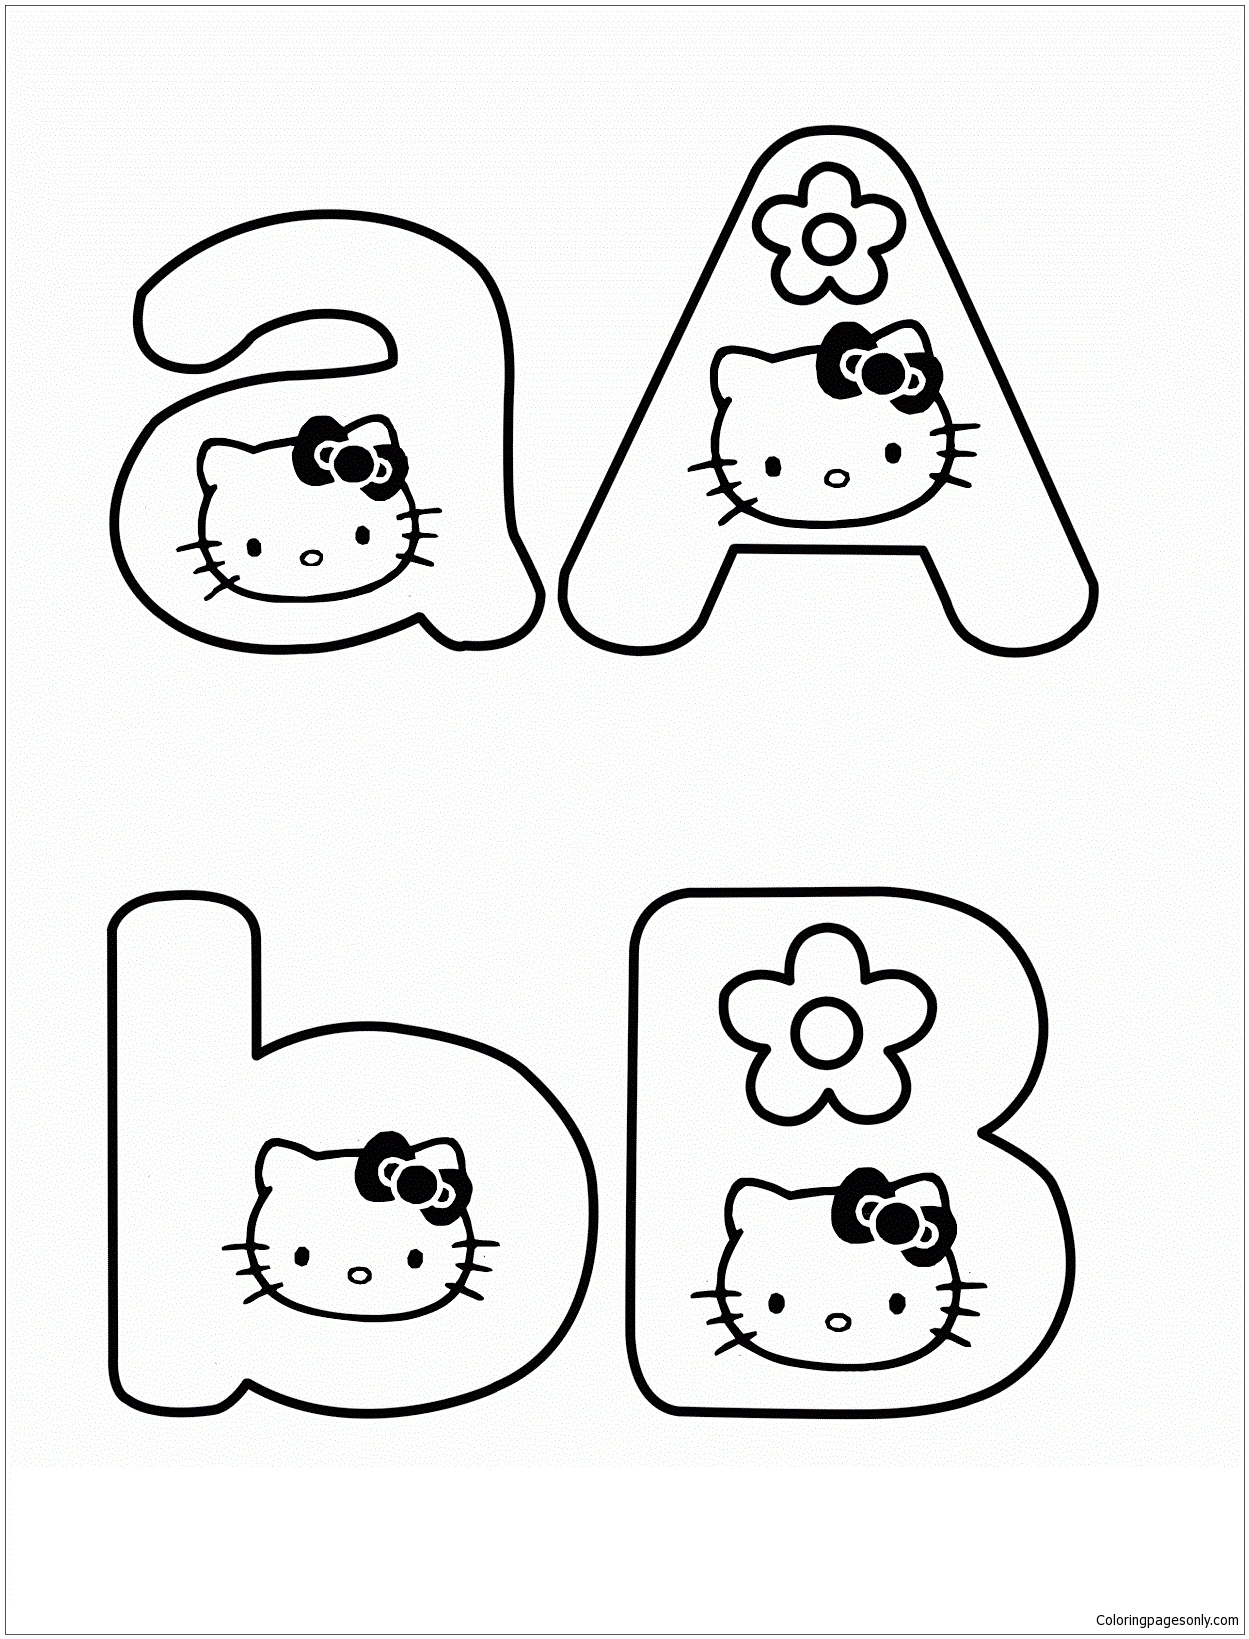 Learning letter A and B With Hello Kitty Coloring Pages